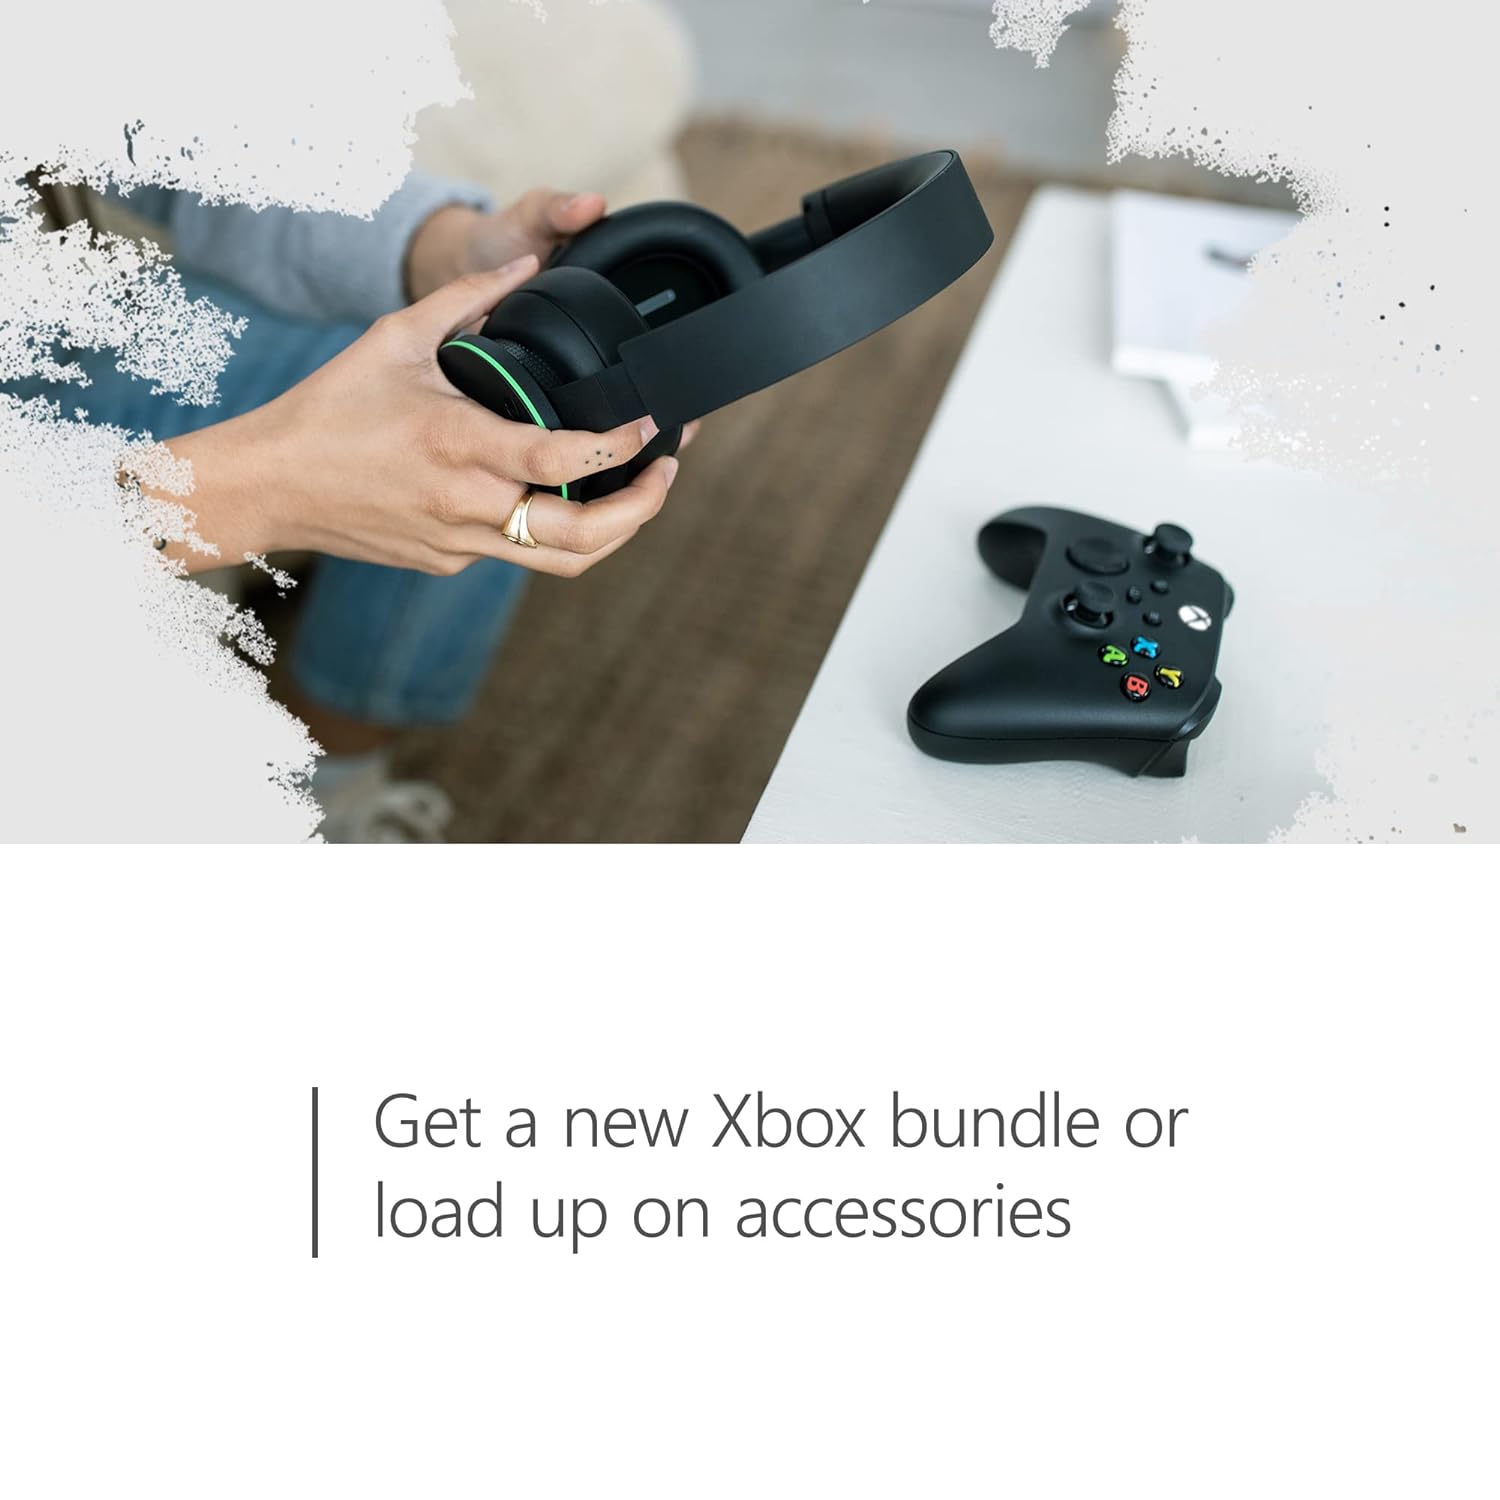 $15 Xbox Digital Gift Card | Get a new Xbox bundle or load up on accessories.